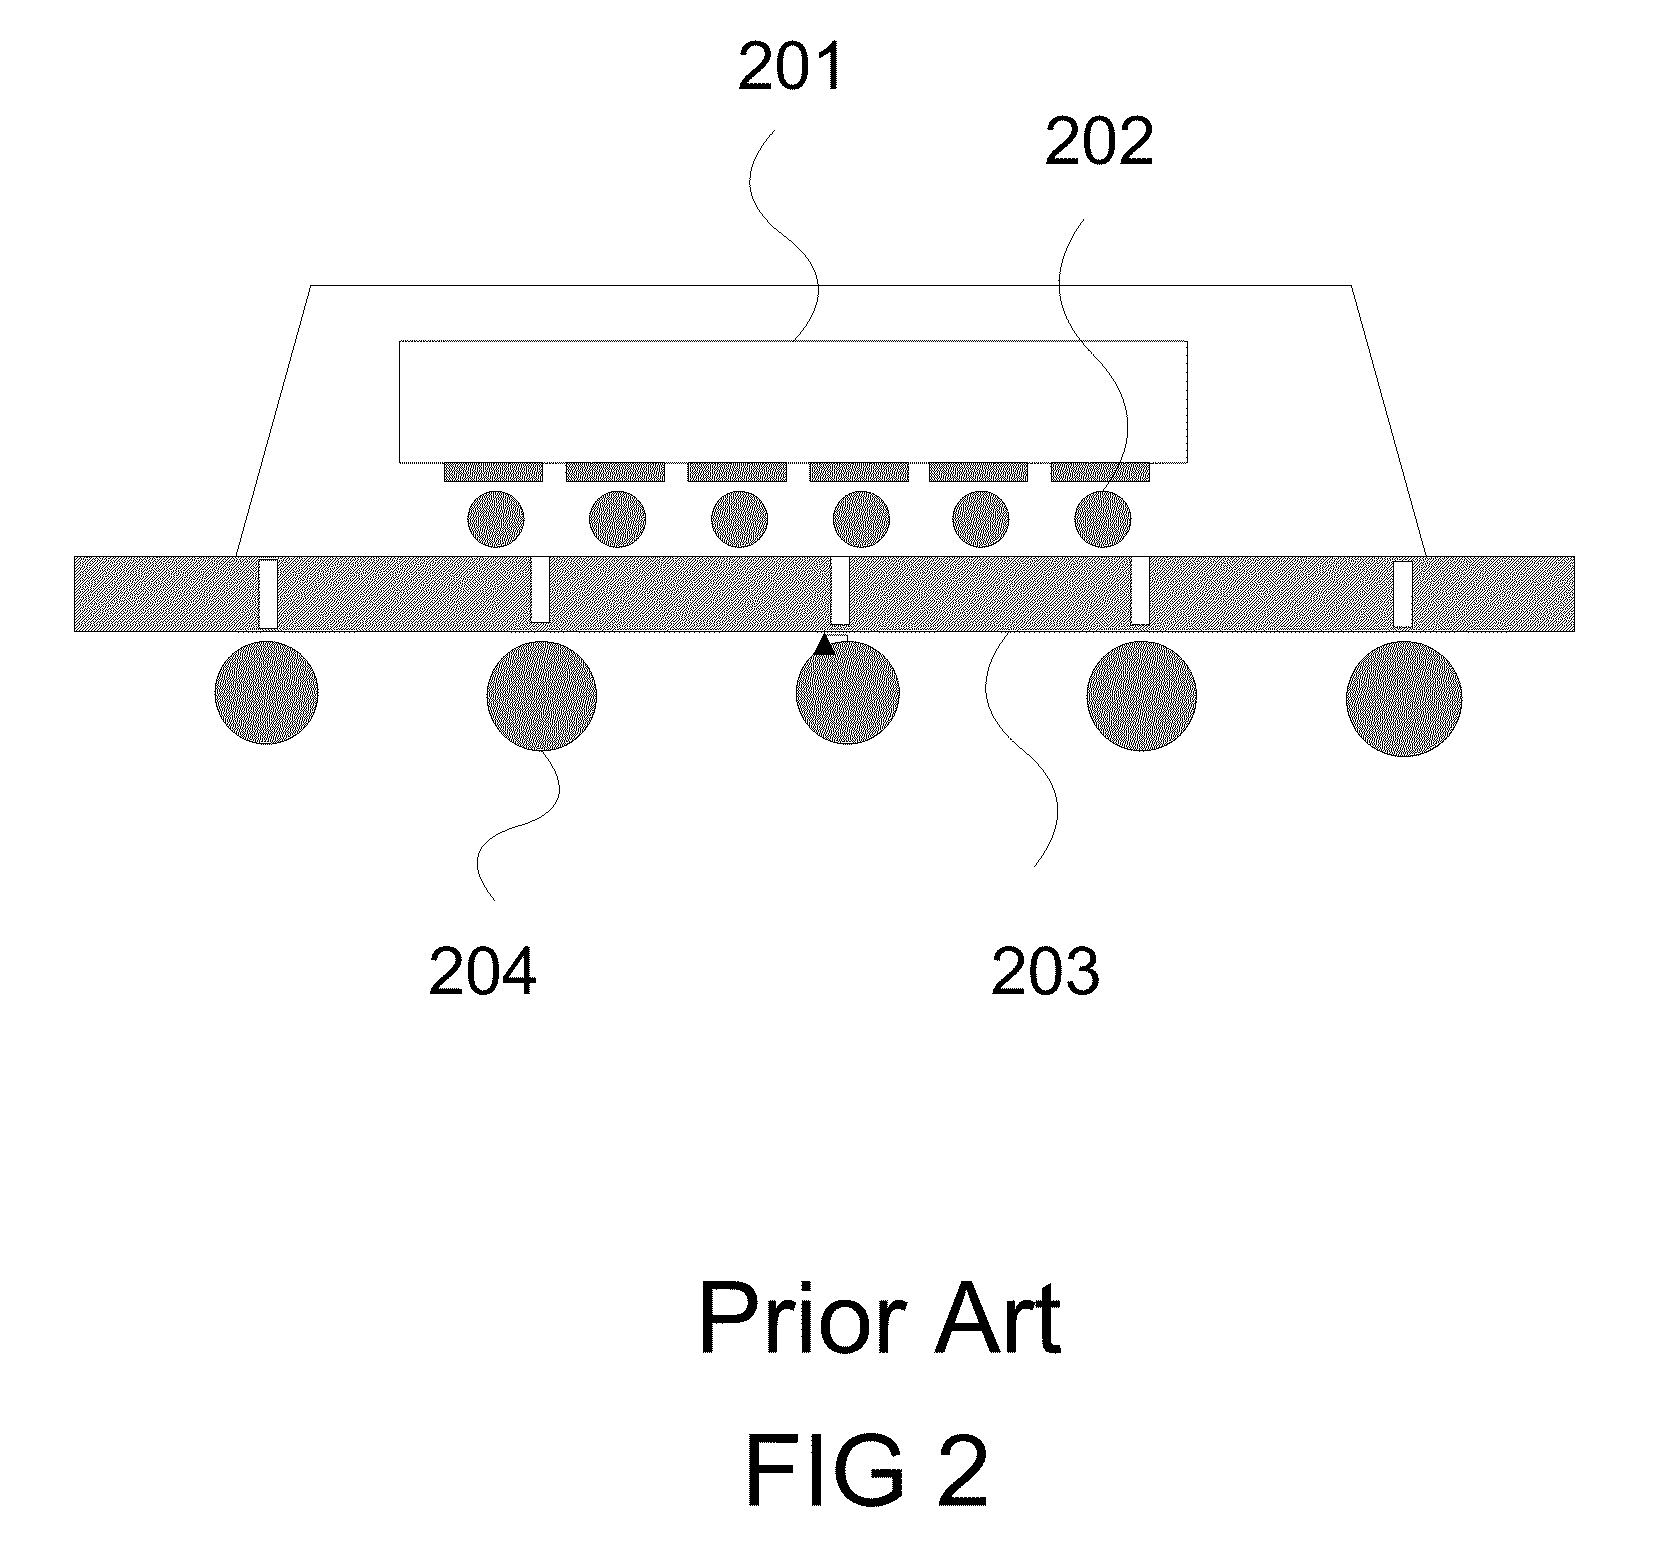 Stacking Integrated Circuits containing Serializer and Deserializer Blocks using Through Silicon Via